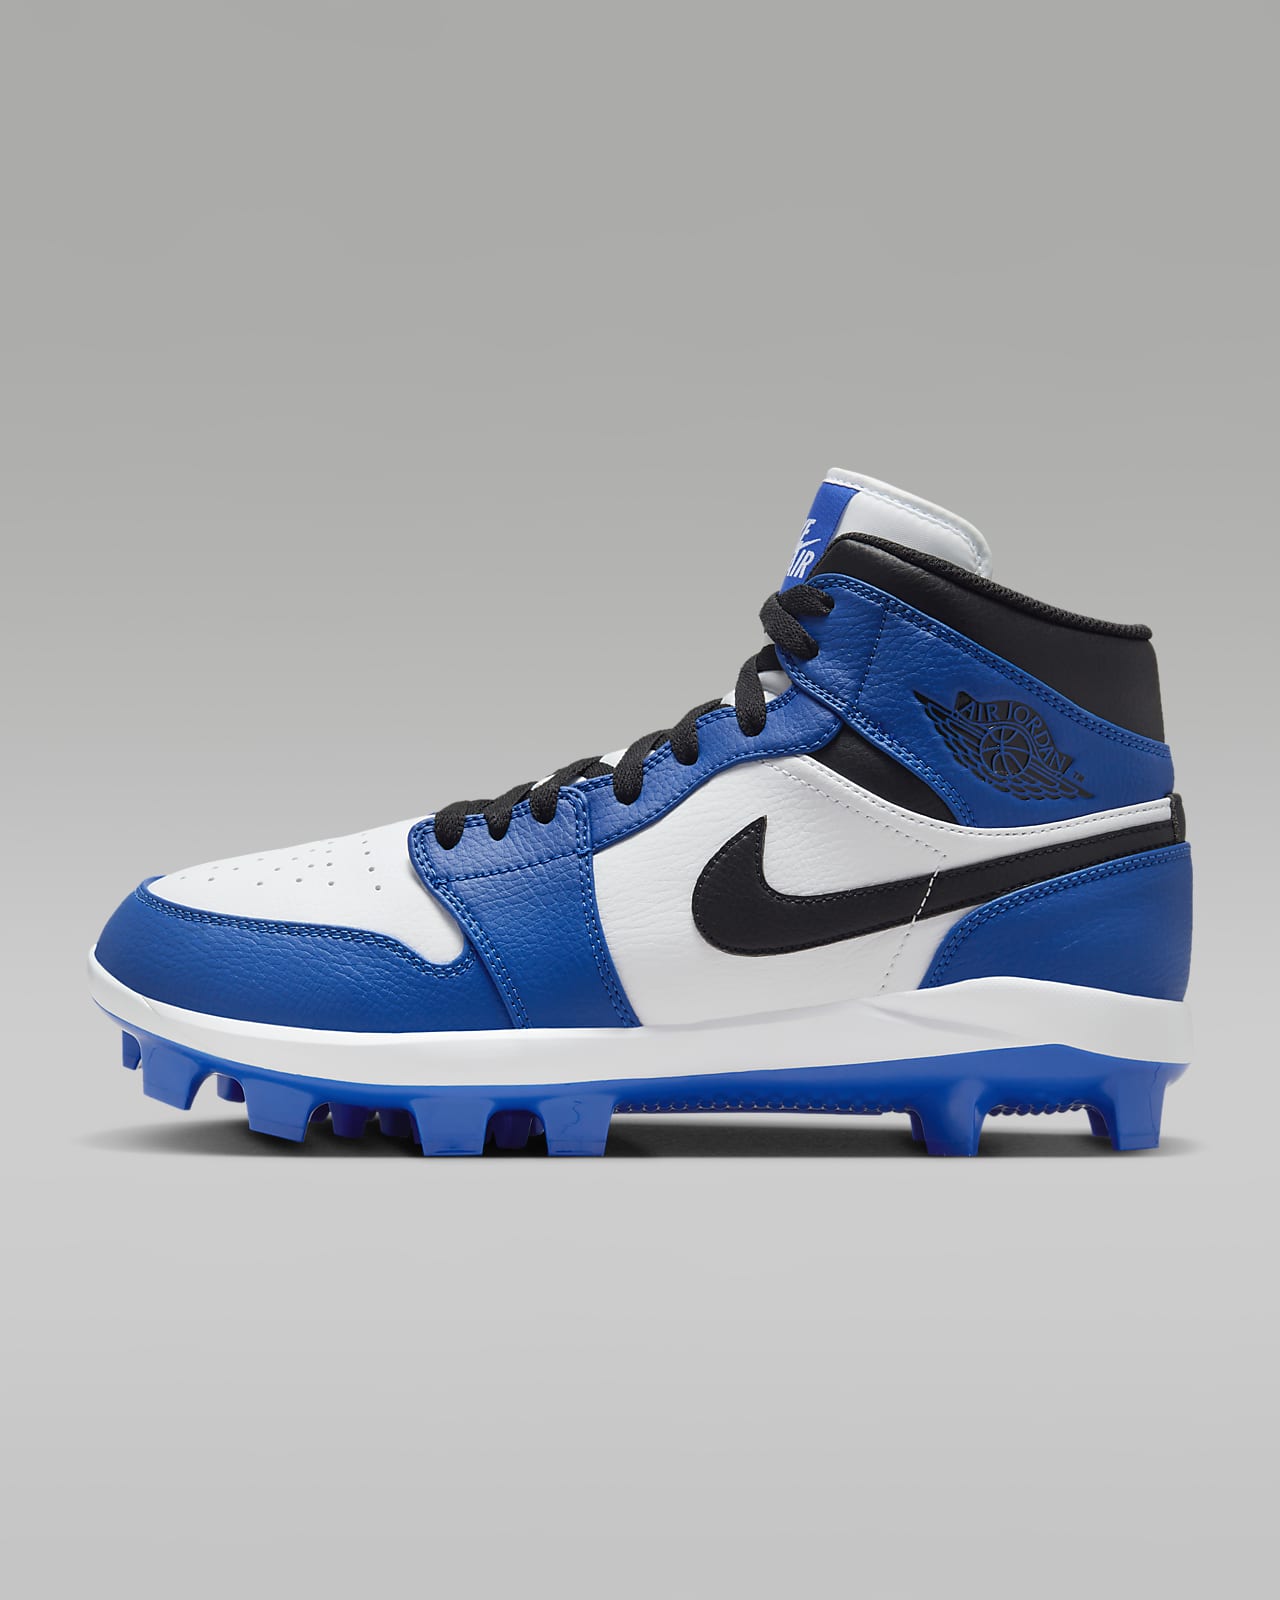 Introduction to Nike Cleats